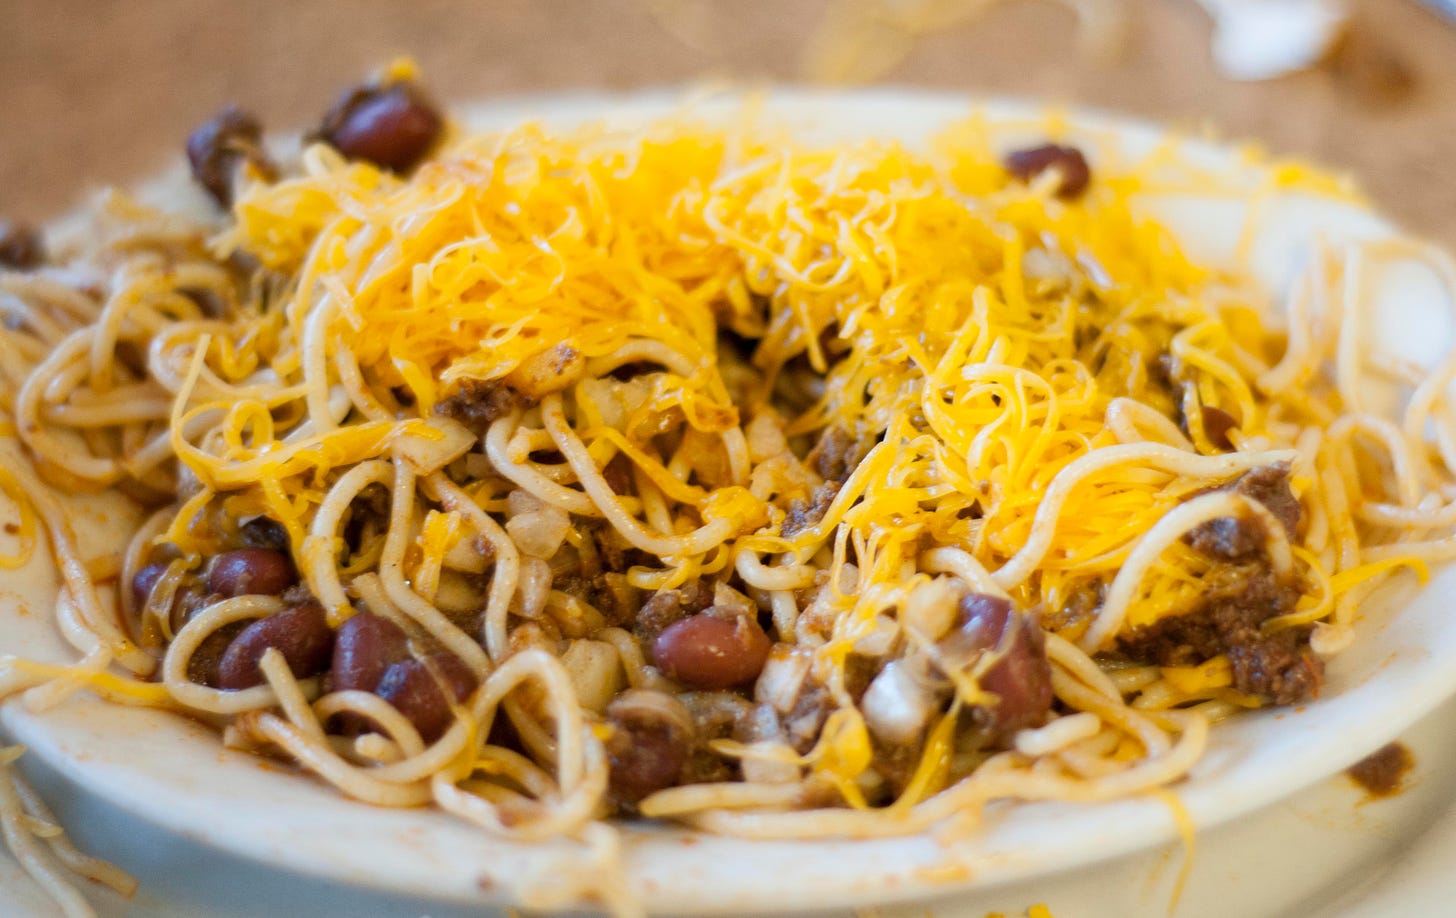 Cincinnati Chili Is a Glorious Mess of Meat, Spaghetti, and Cheese - MUNCHIES